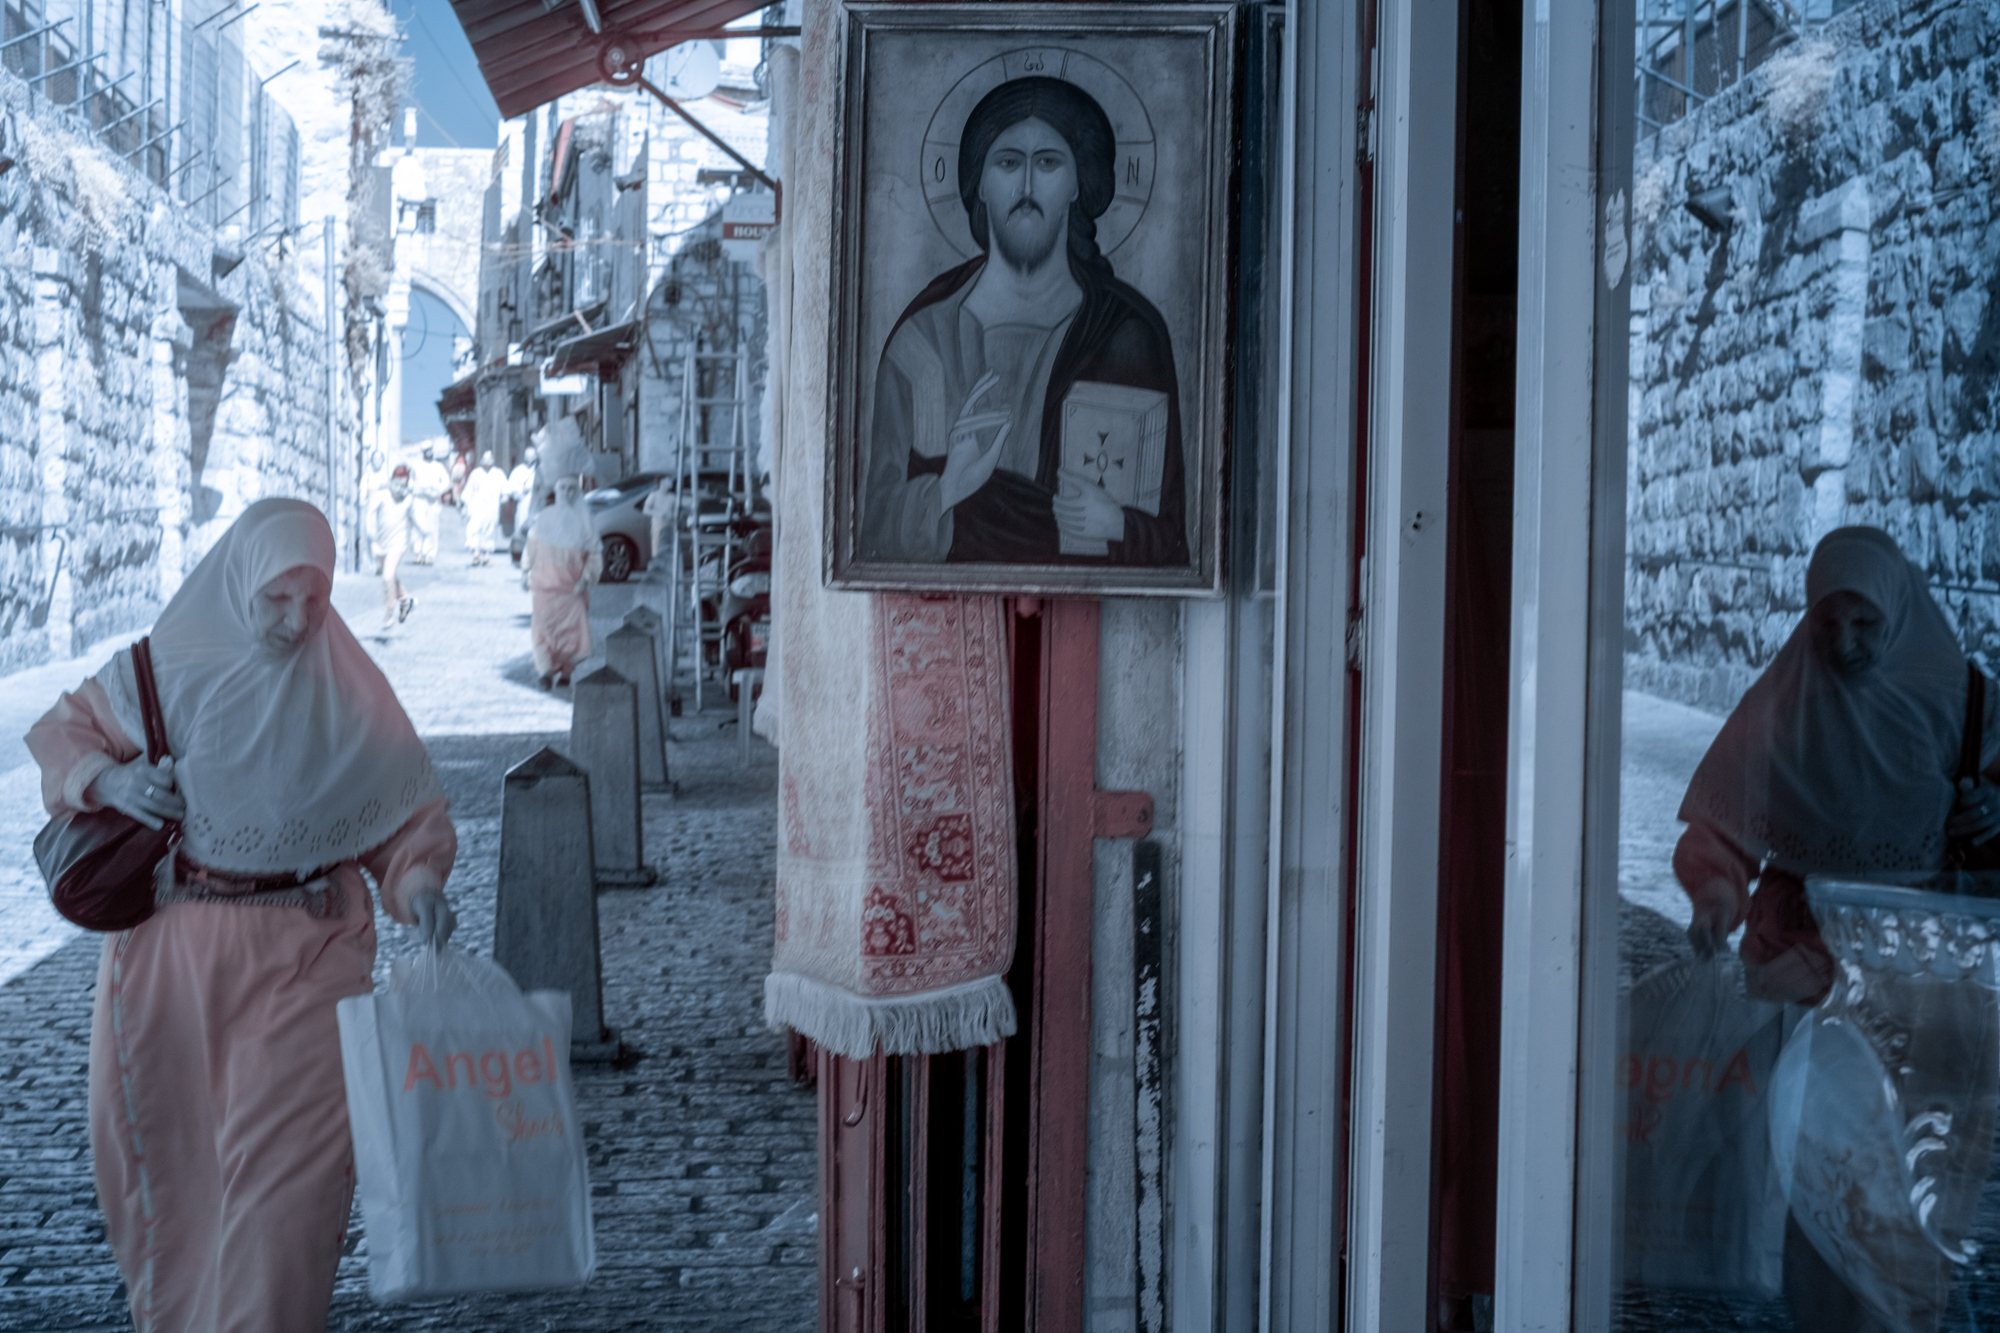 A Muslim woman walks past an icon of Jesus as she walks on the Via Dolorosa, the path Jesus was believed to have walked to his crucifixion.